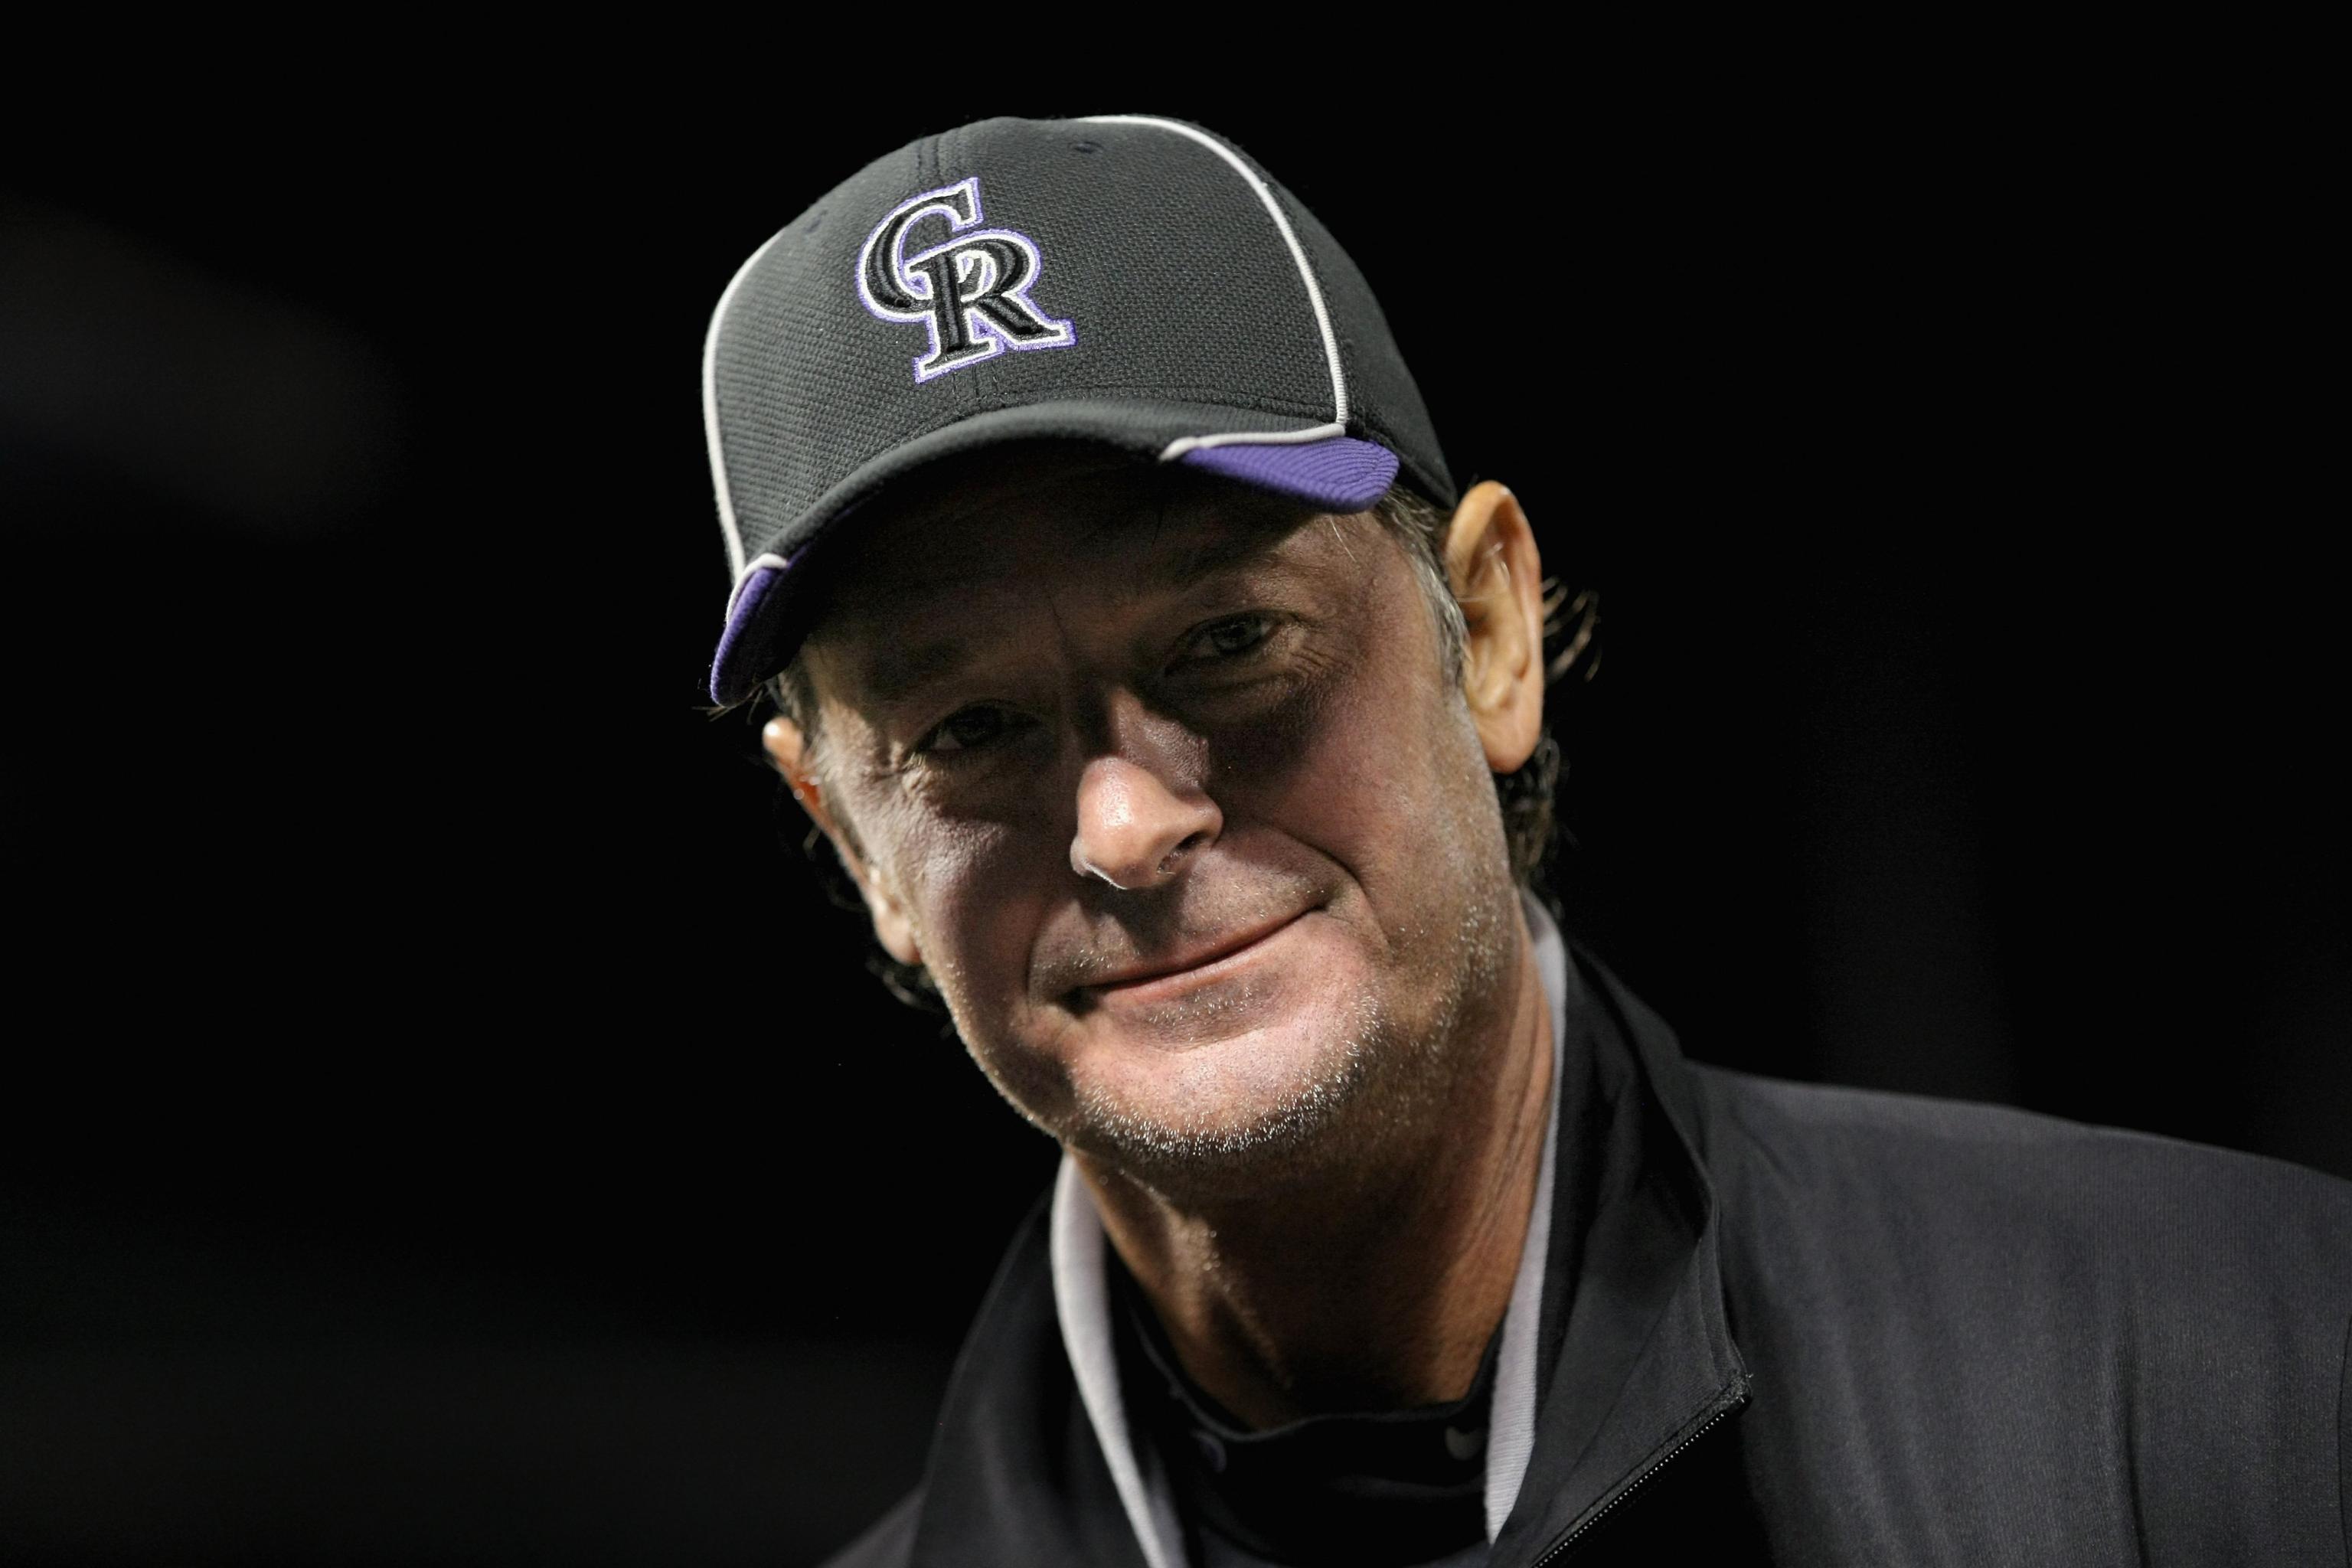 Colorado Rockies pitcher Jamie Moyer still has competitive fire at age 49 